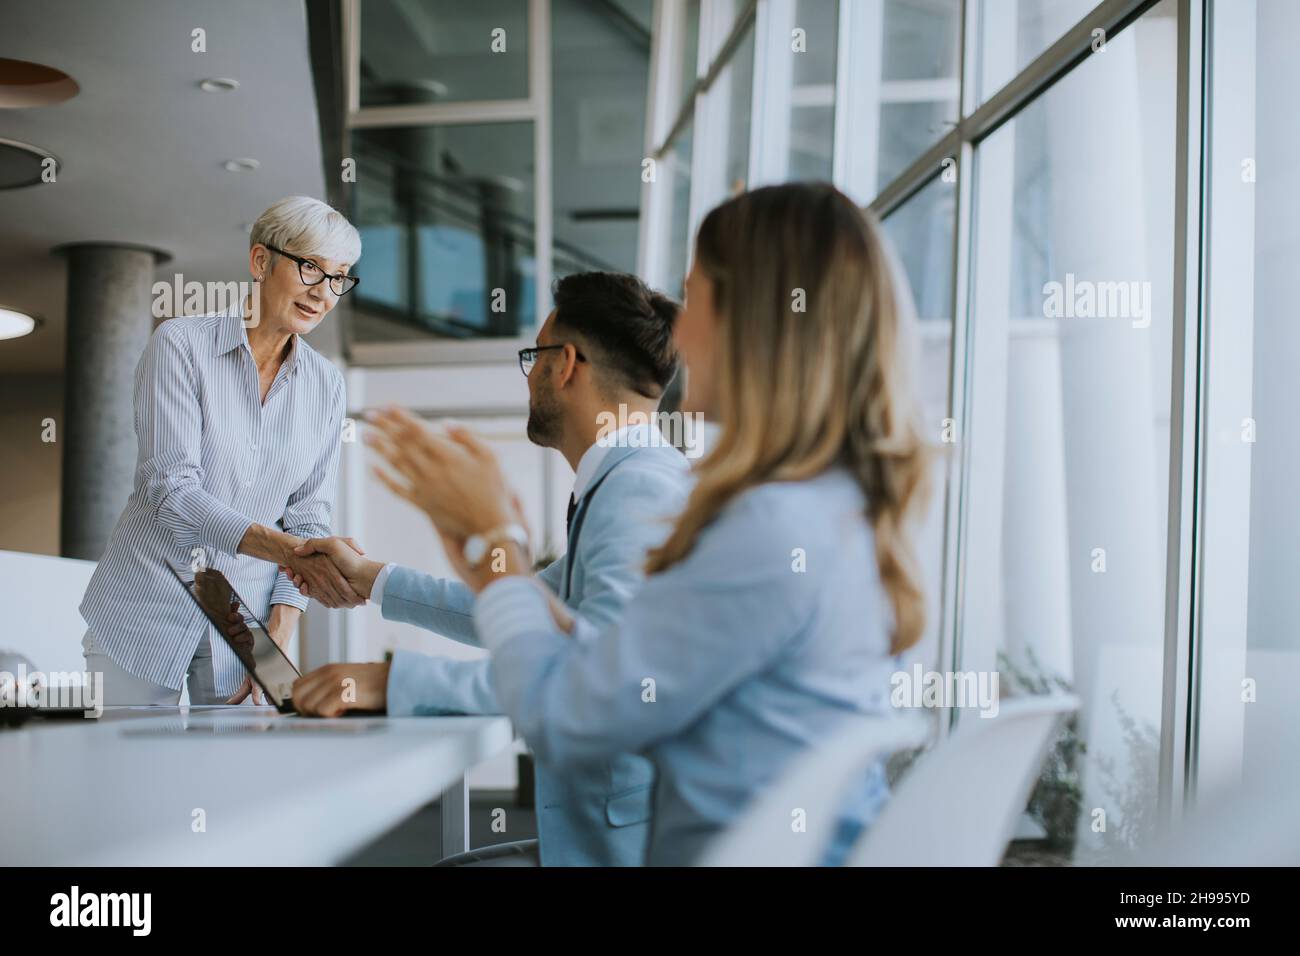 Mature business woman handshaking with young colleague on a meeting in the office Stock Photo